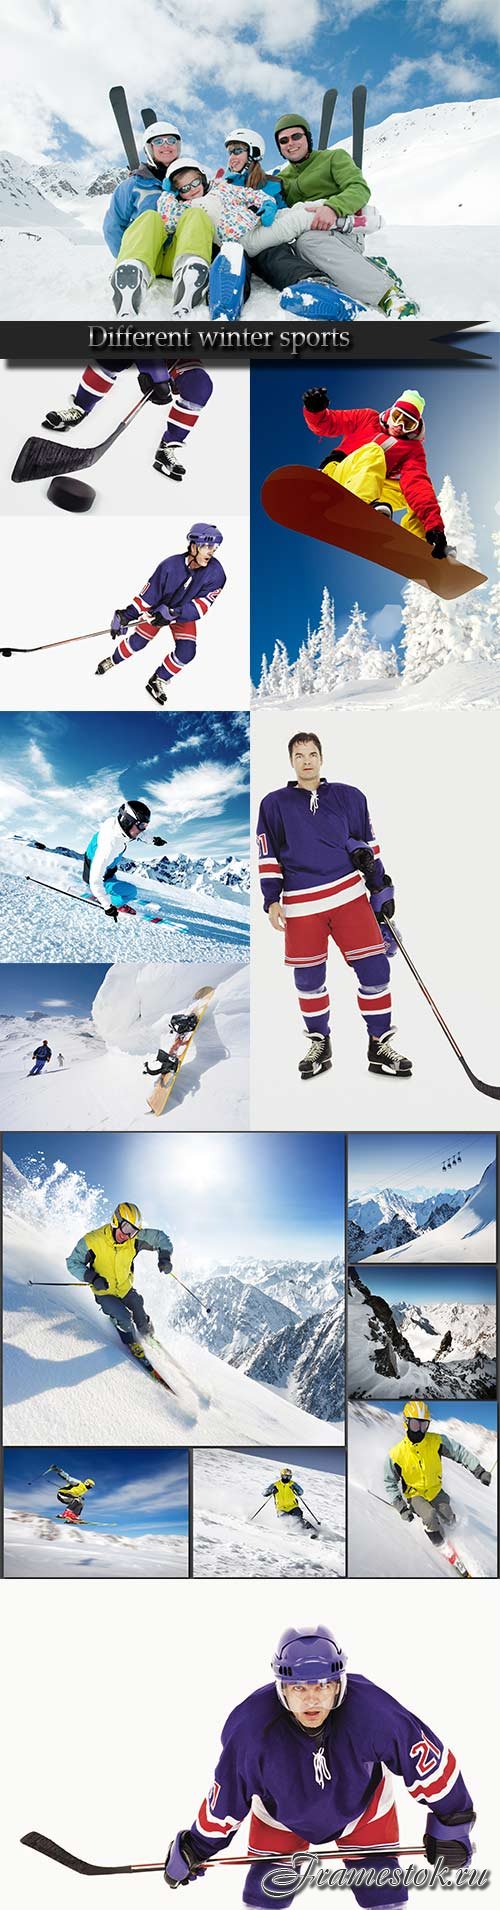 Different winter sports